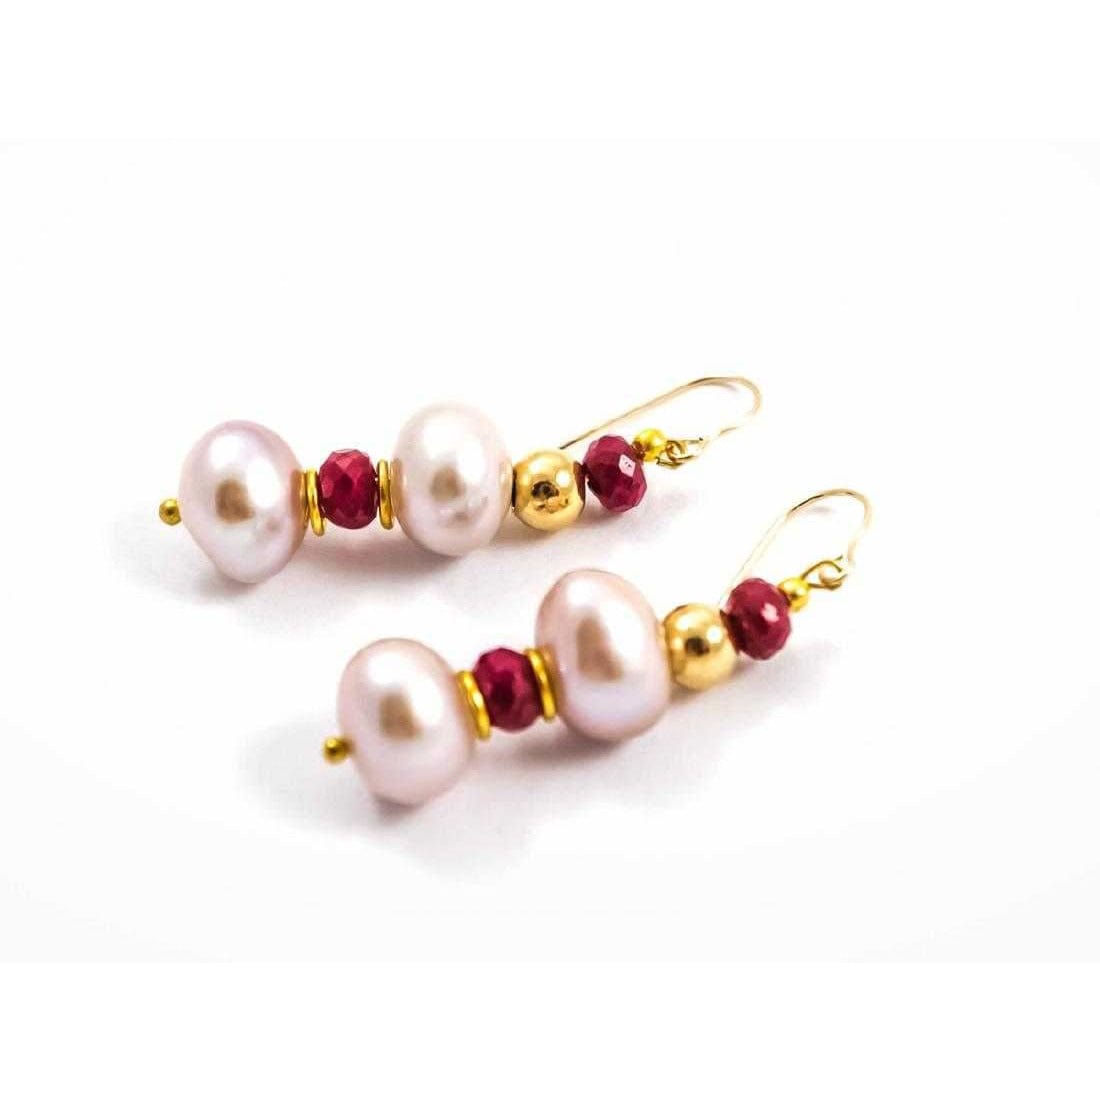 REGENZ Gemstone Earrings-Jade, Turquoise, Coral, Citrine, Pearls, Lapis HANDMADE with Love! - The Pink Pigs, A Compassionate Boutique